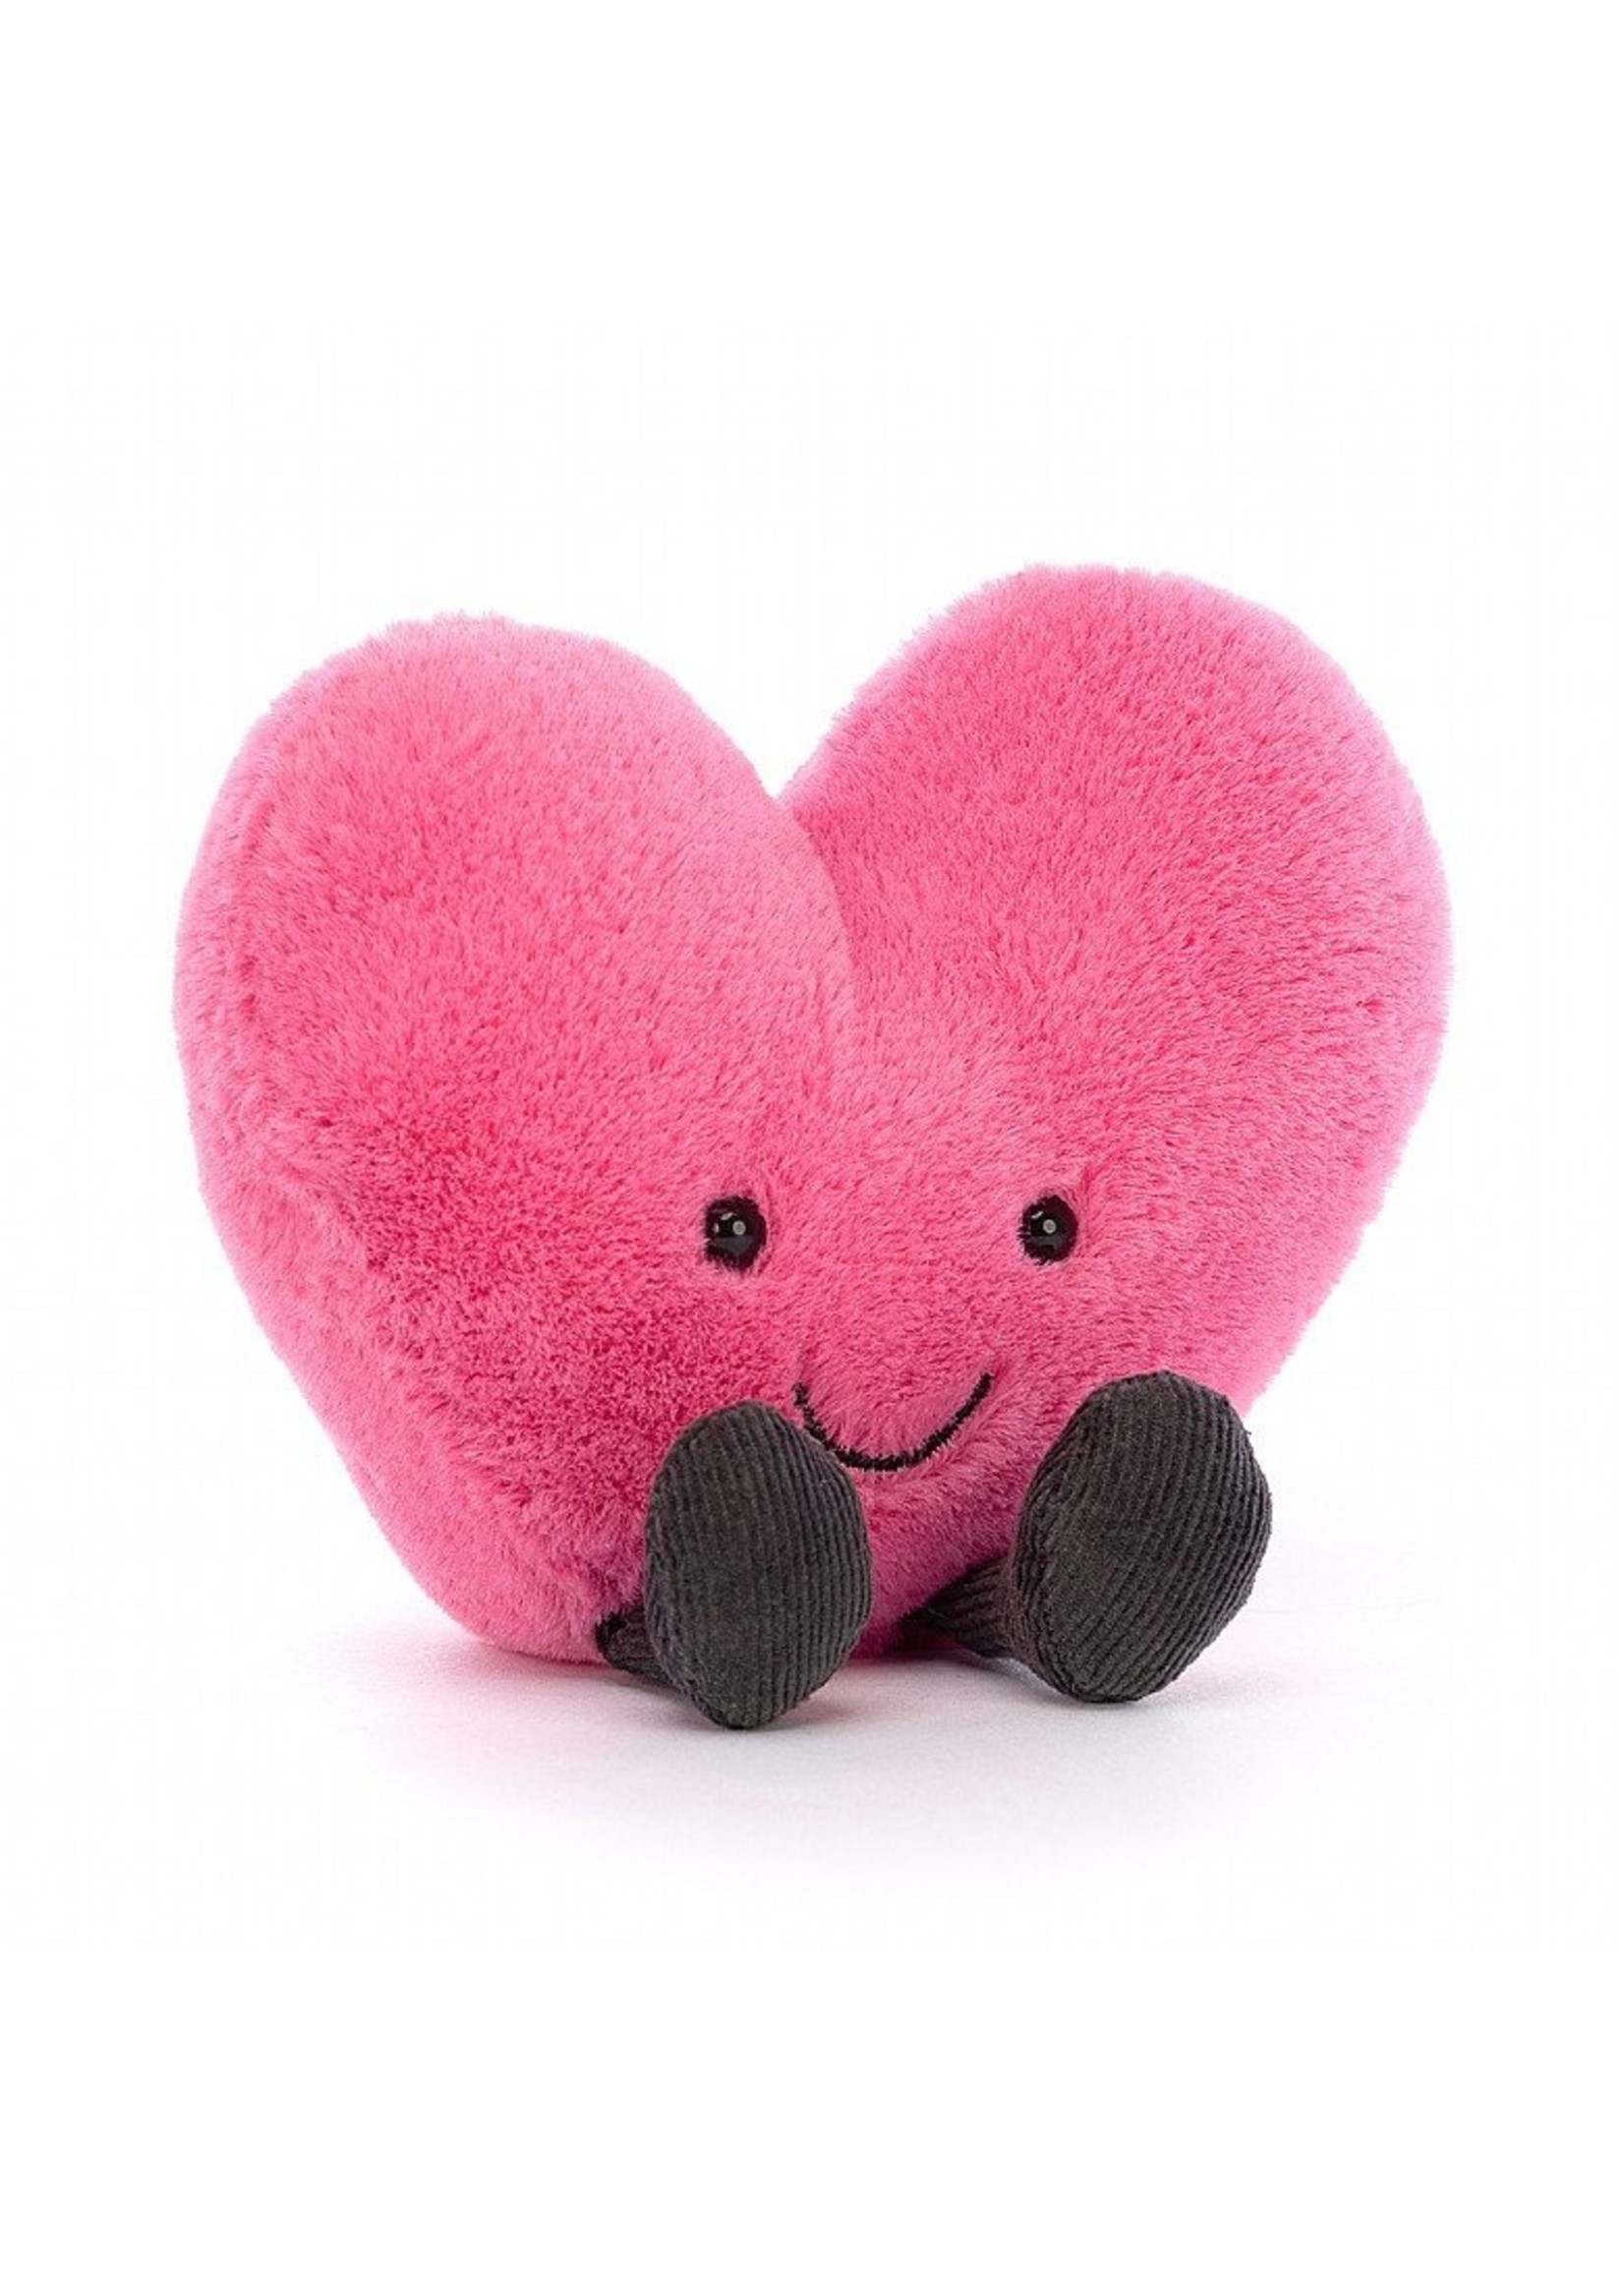 Jellycat Amuseable Hot Pink Heart - Small